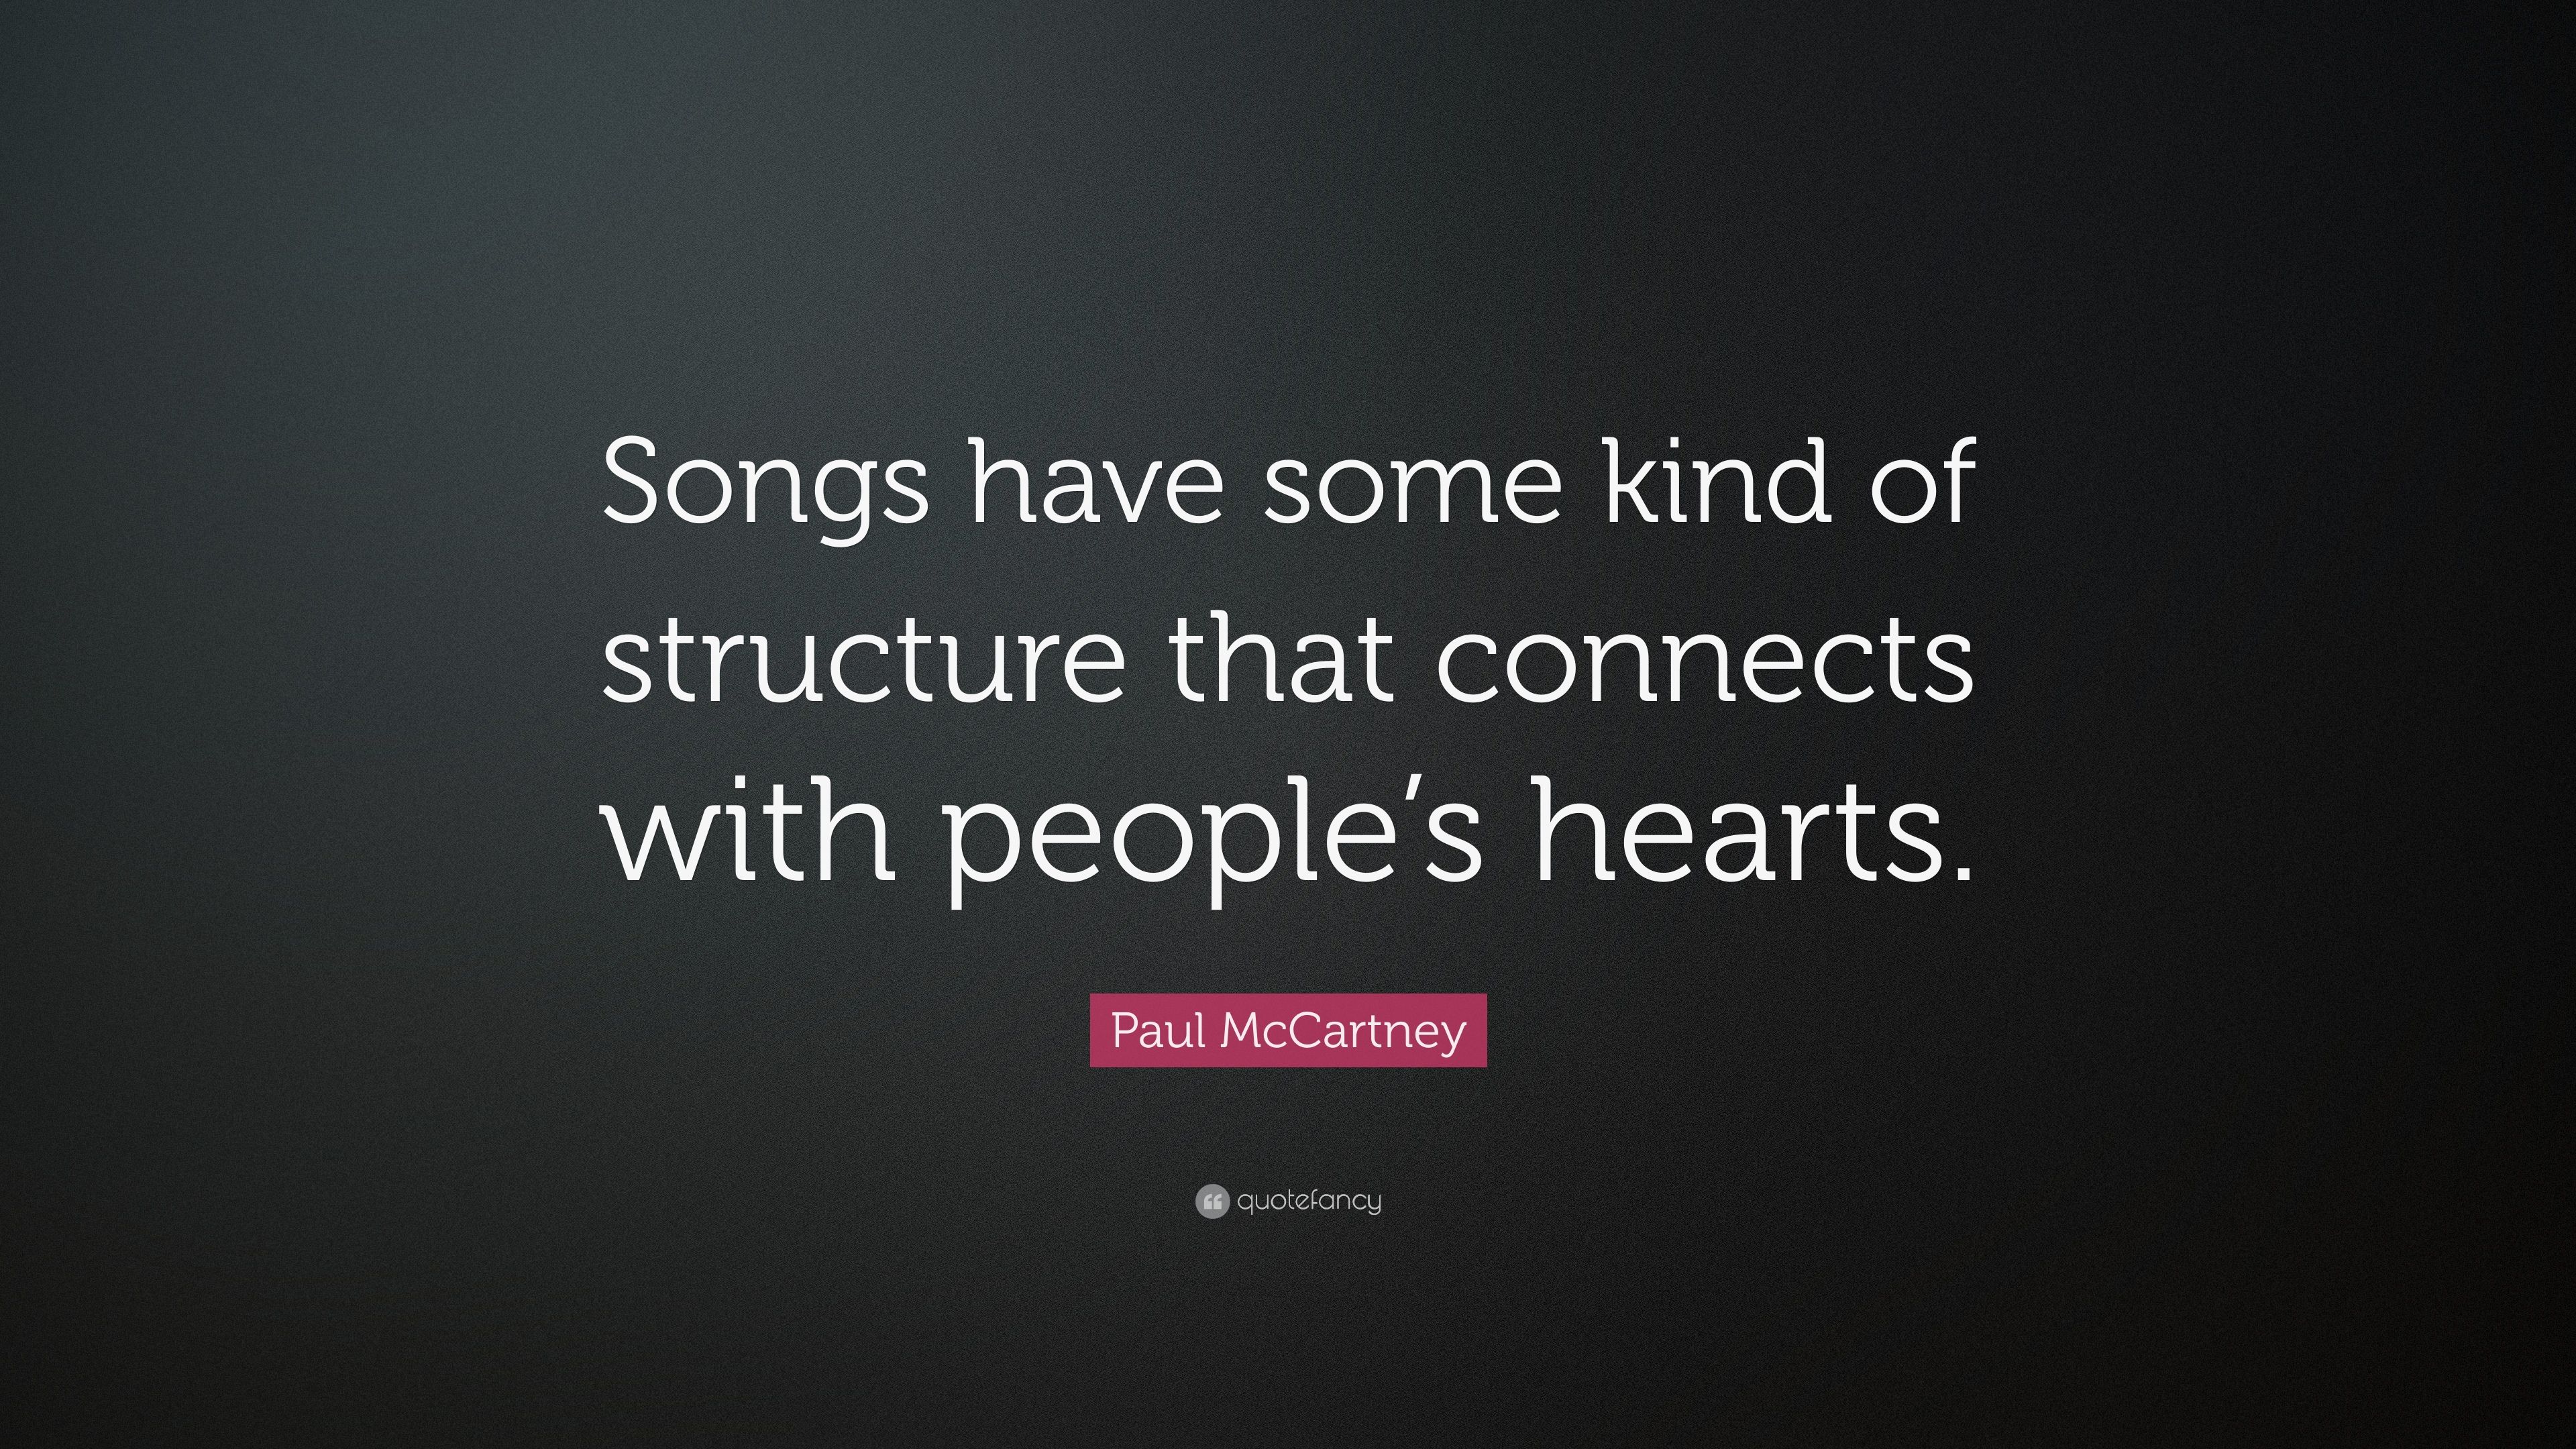 Paul McCartney Quote: “Songs have some kind of structure that